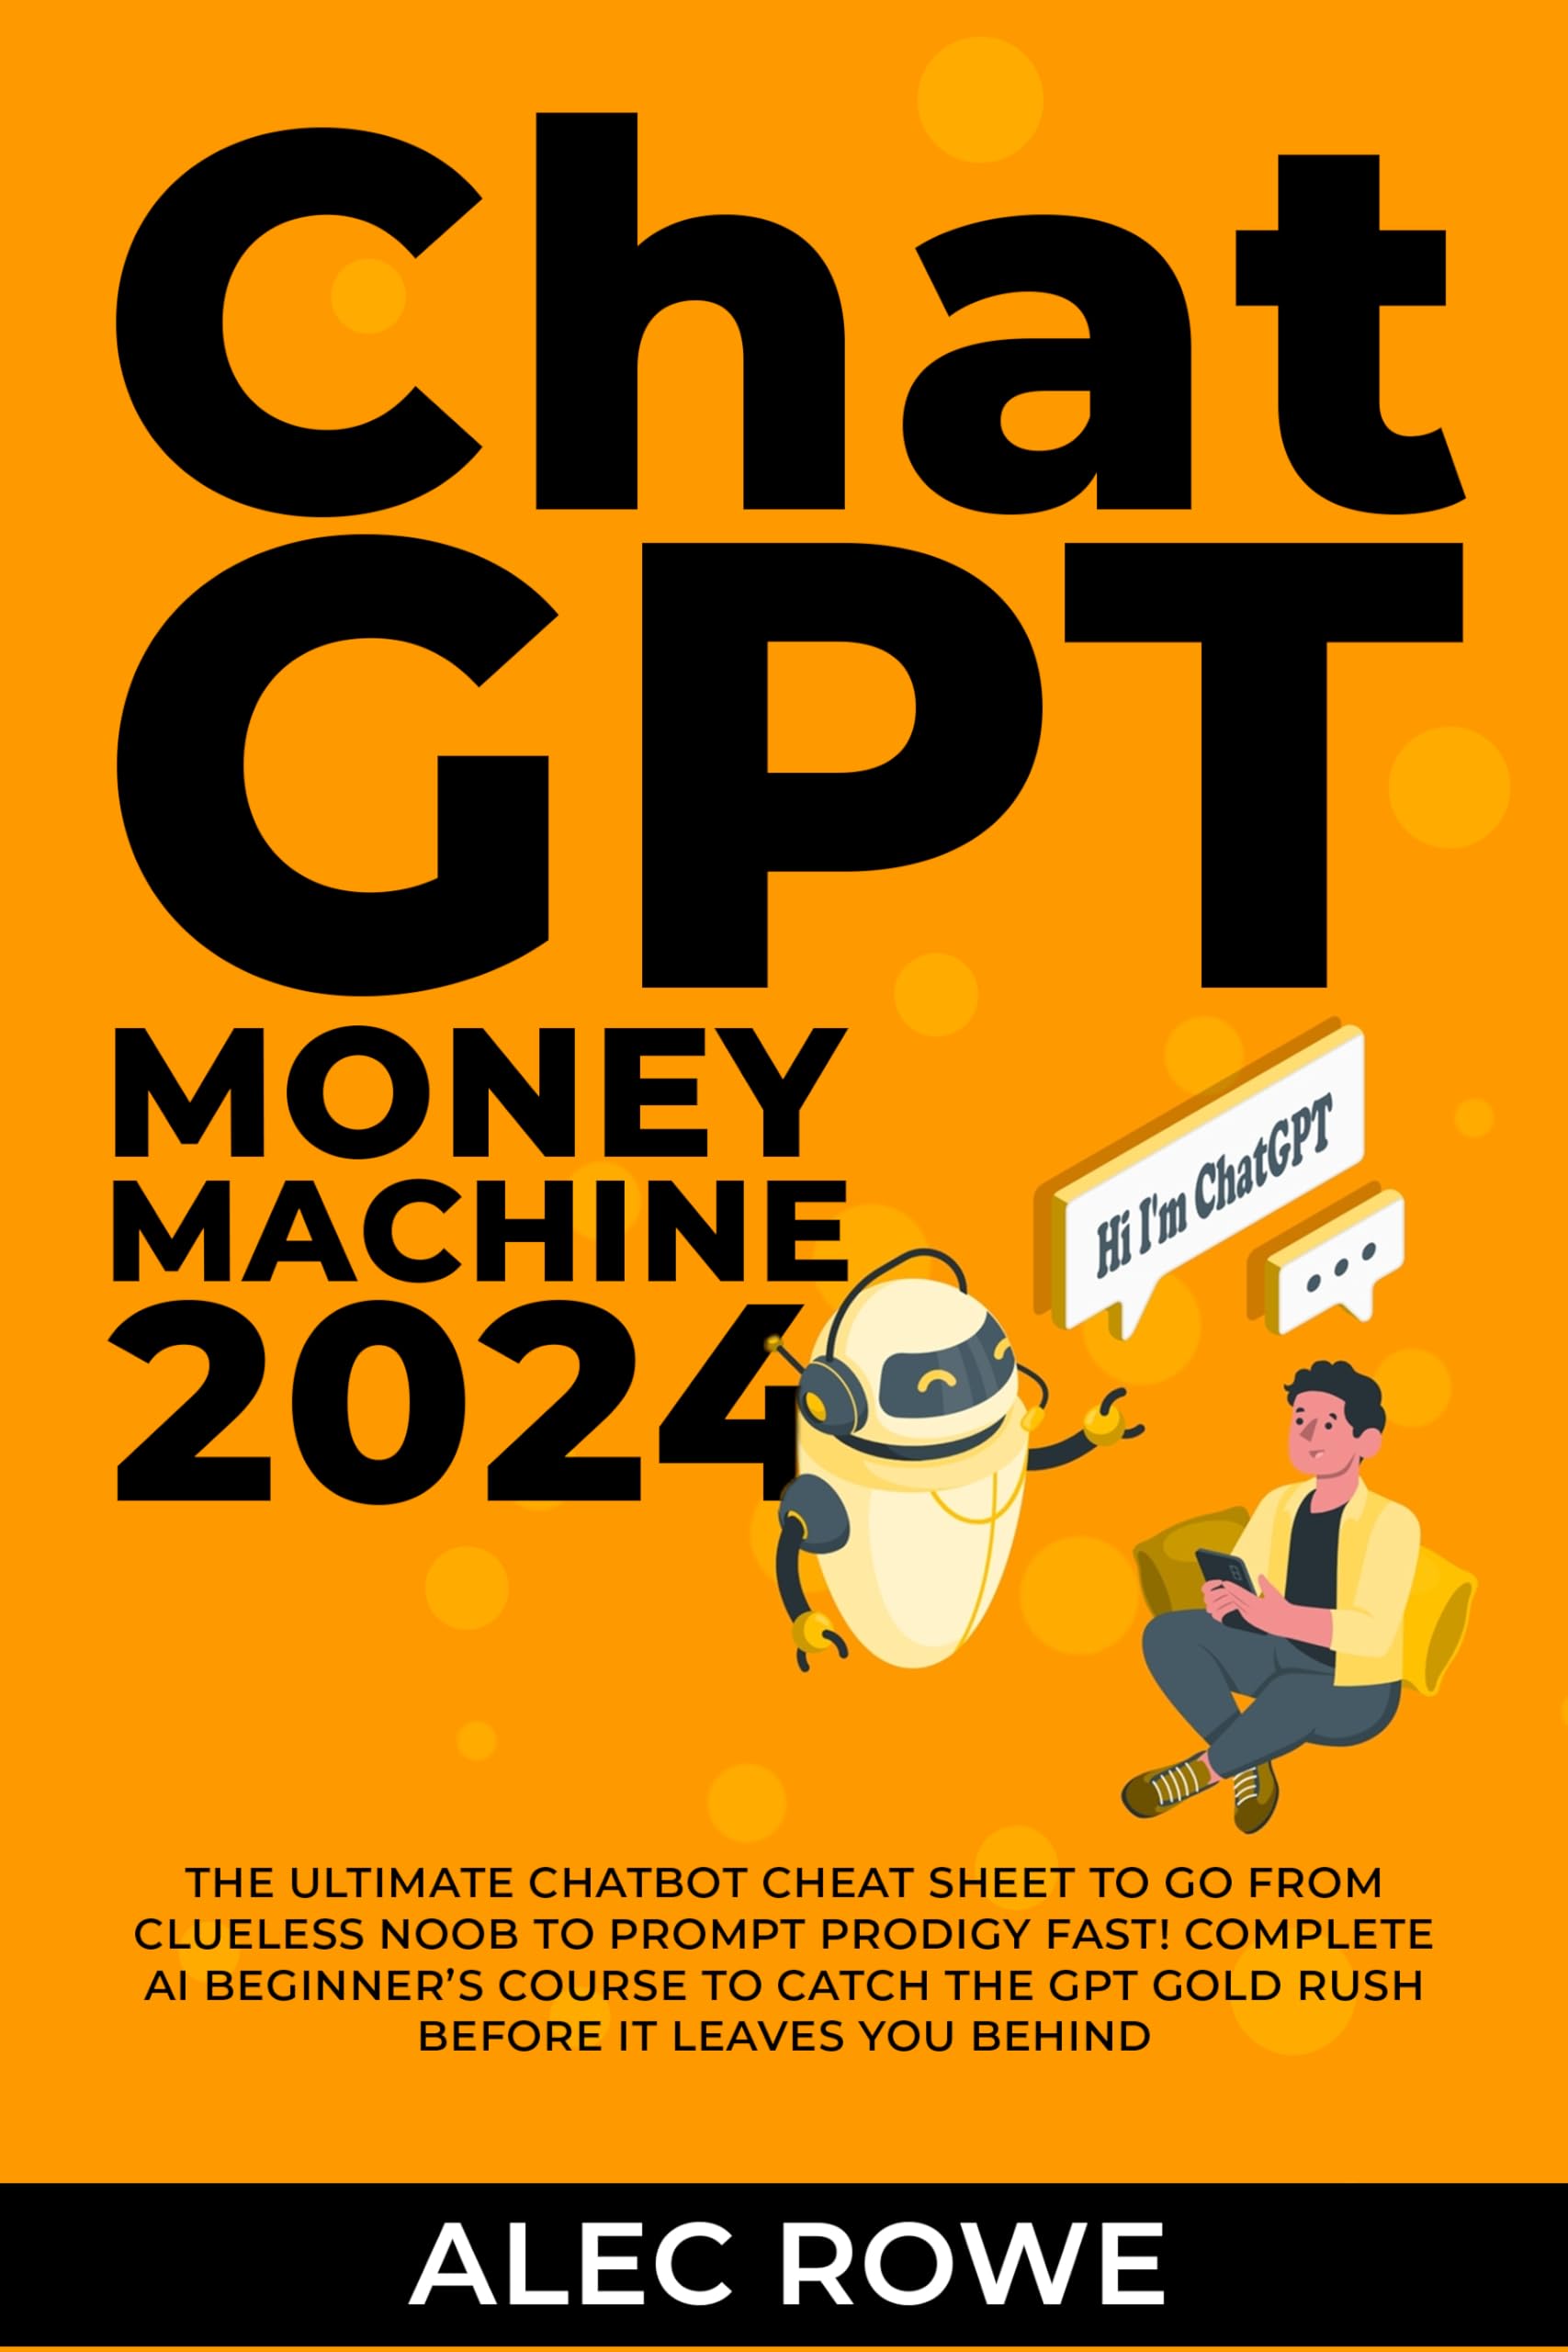 ChatGPT Money Machine 2024 - The Ultimate Chatbot Cheat Sheet to Go from Clueless Noob to Prompt Prodigy Fast!: Complete AI Beginner’s Course to Catch the GPT Gold Rush Before It Leaves You Behind